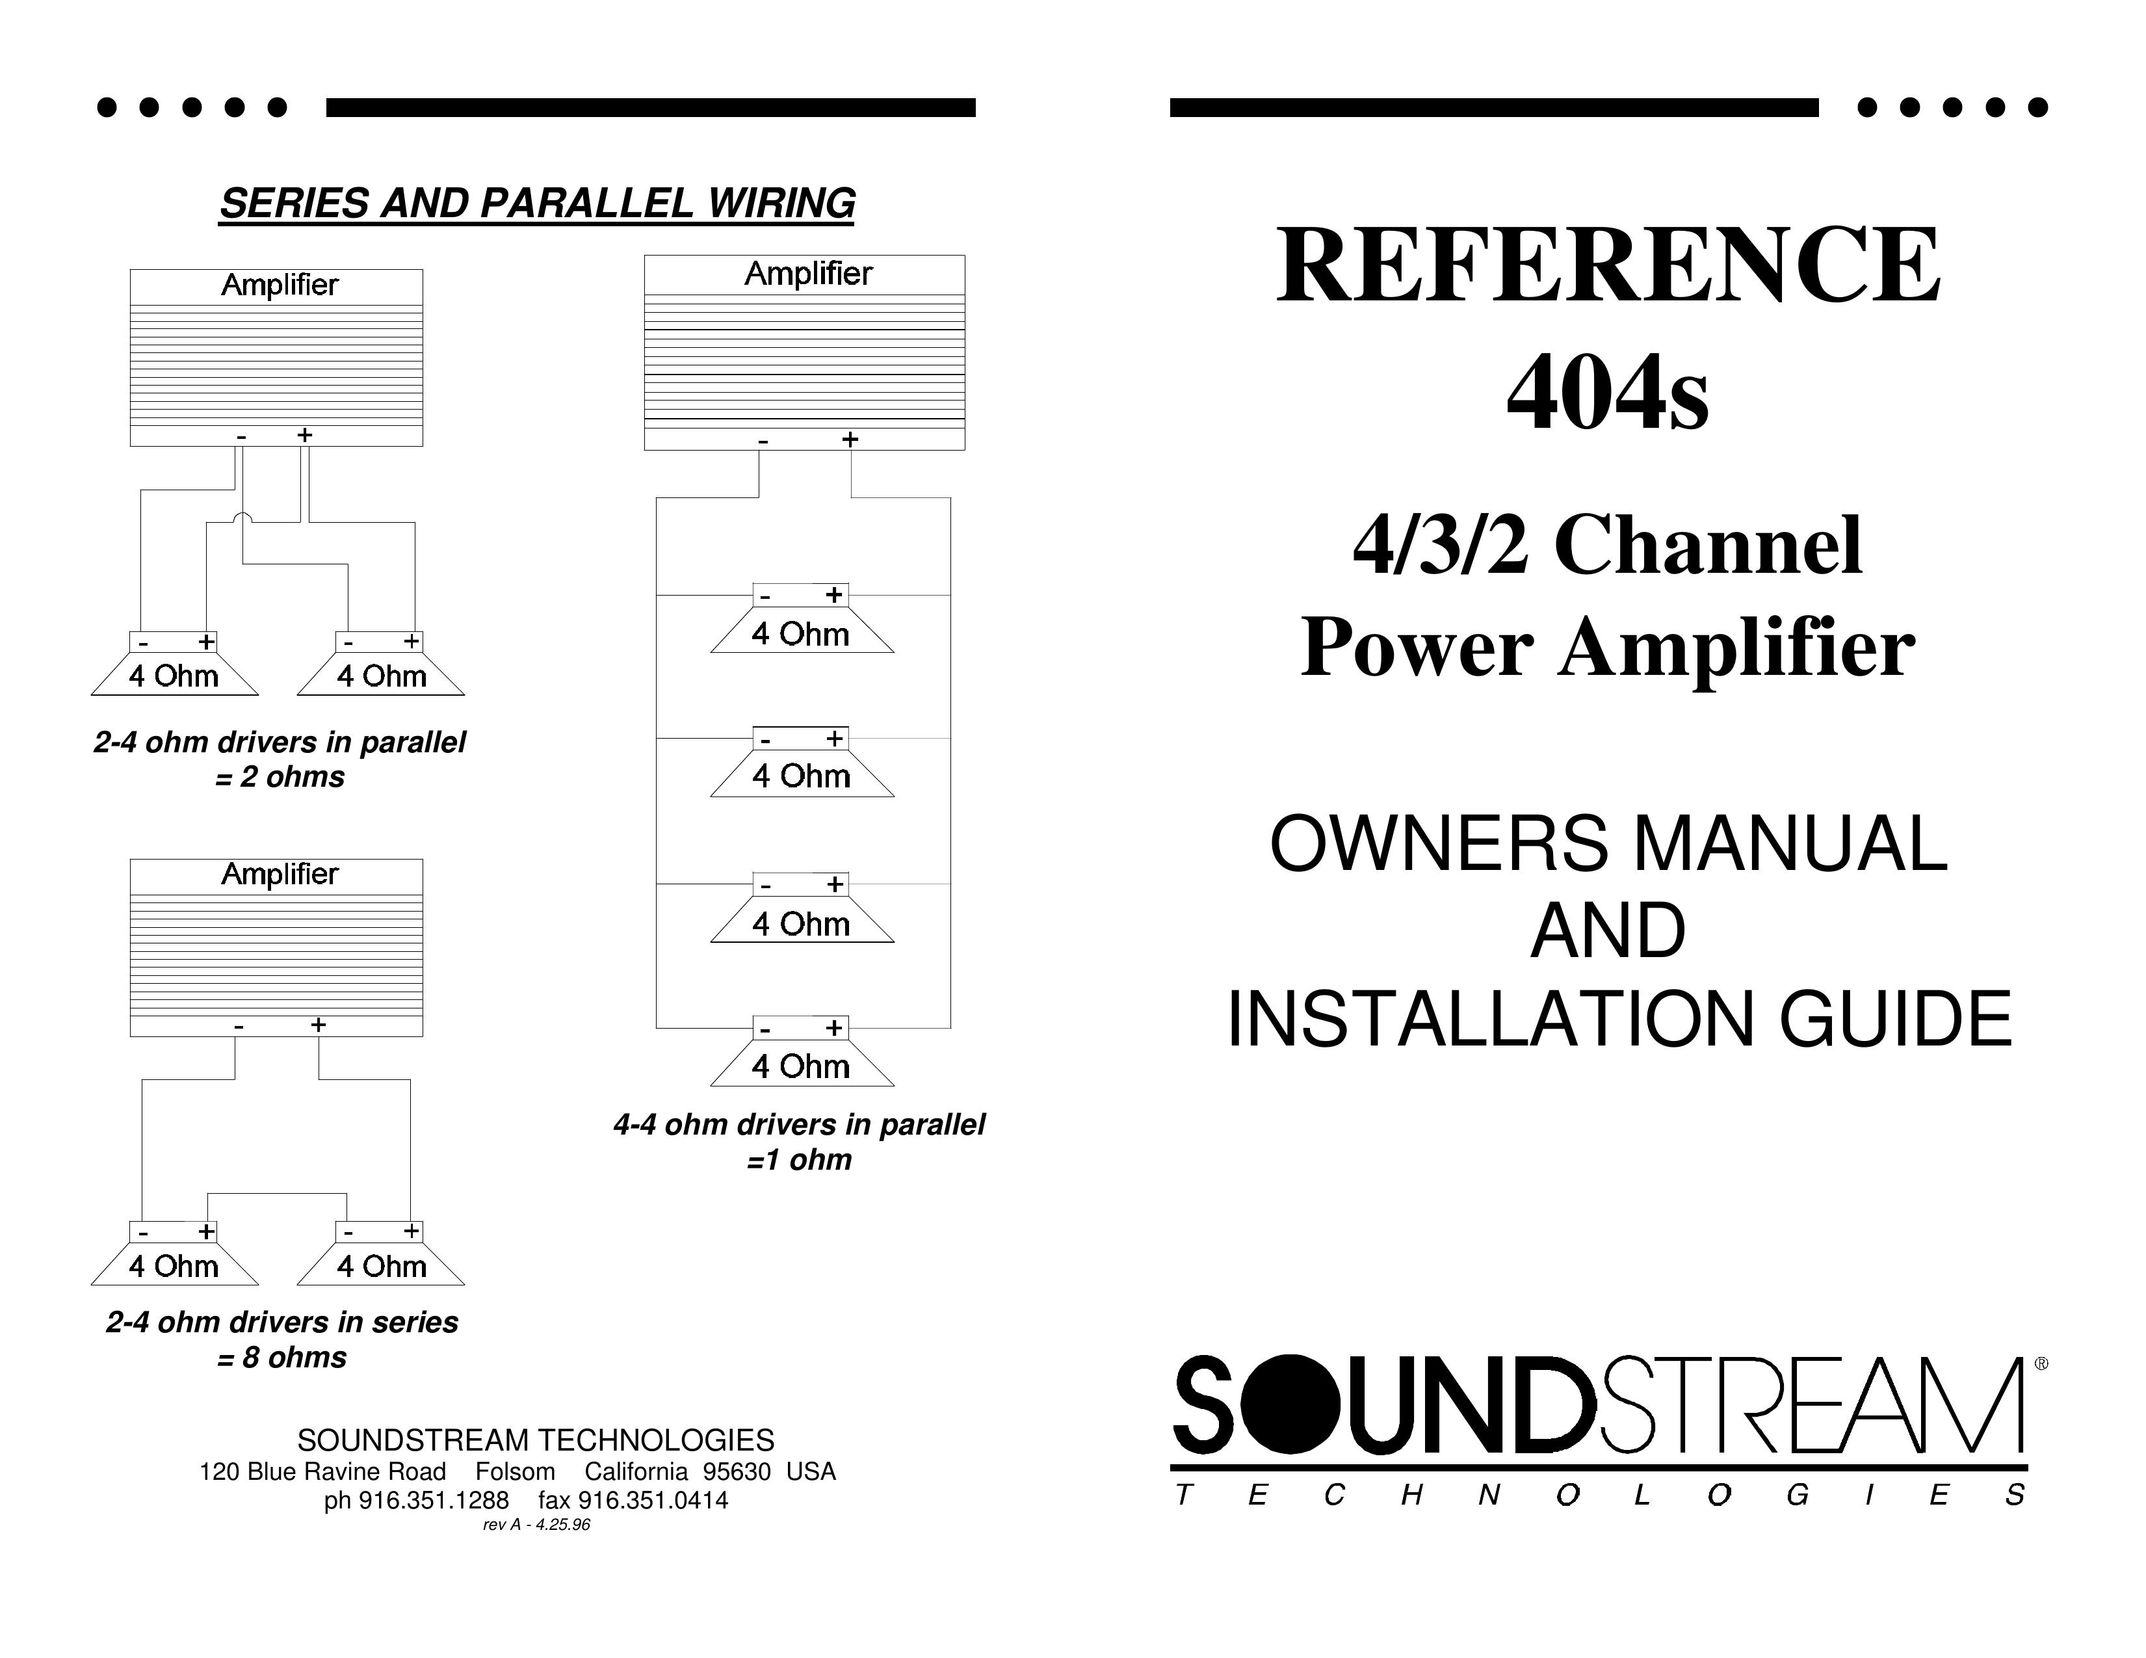 Soundstream Technologies 404s Car Stereo System User Manual